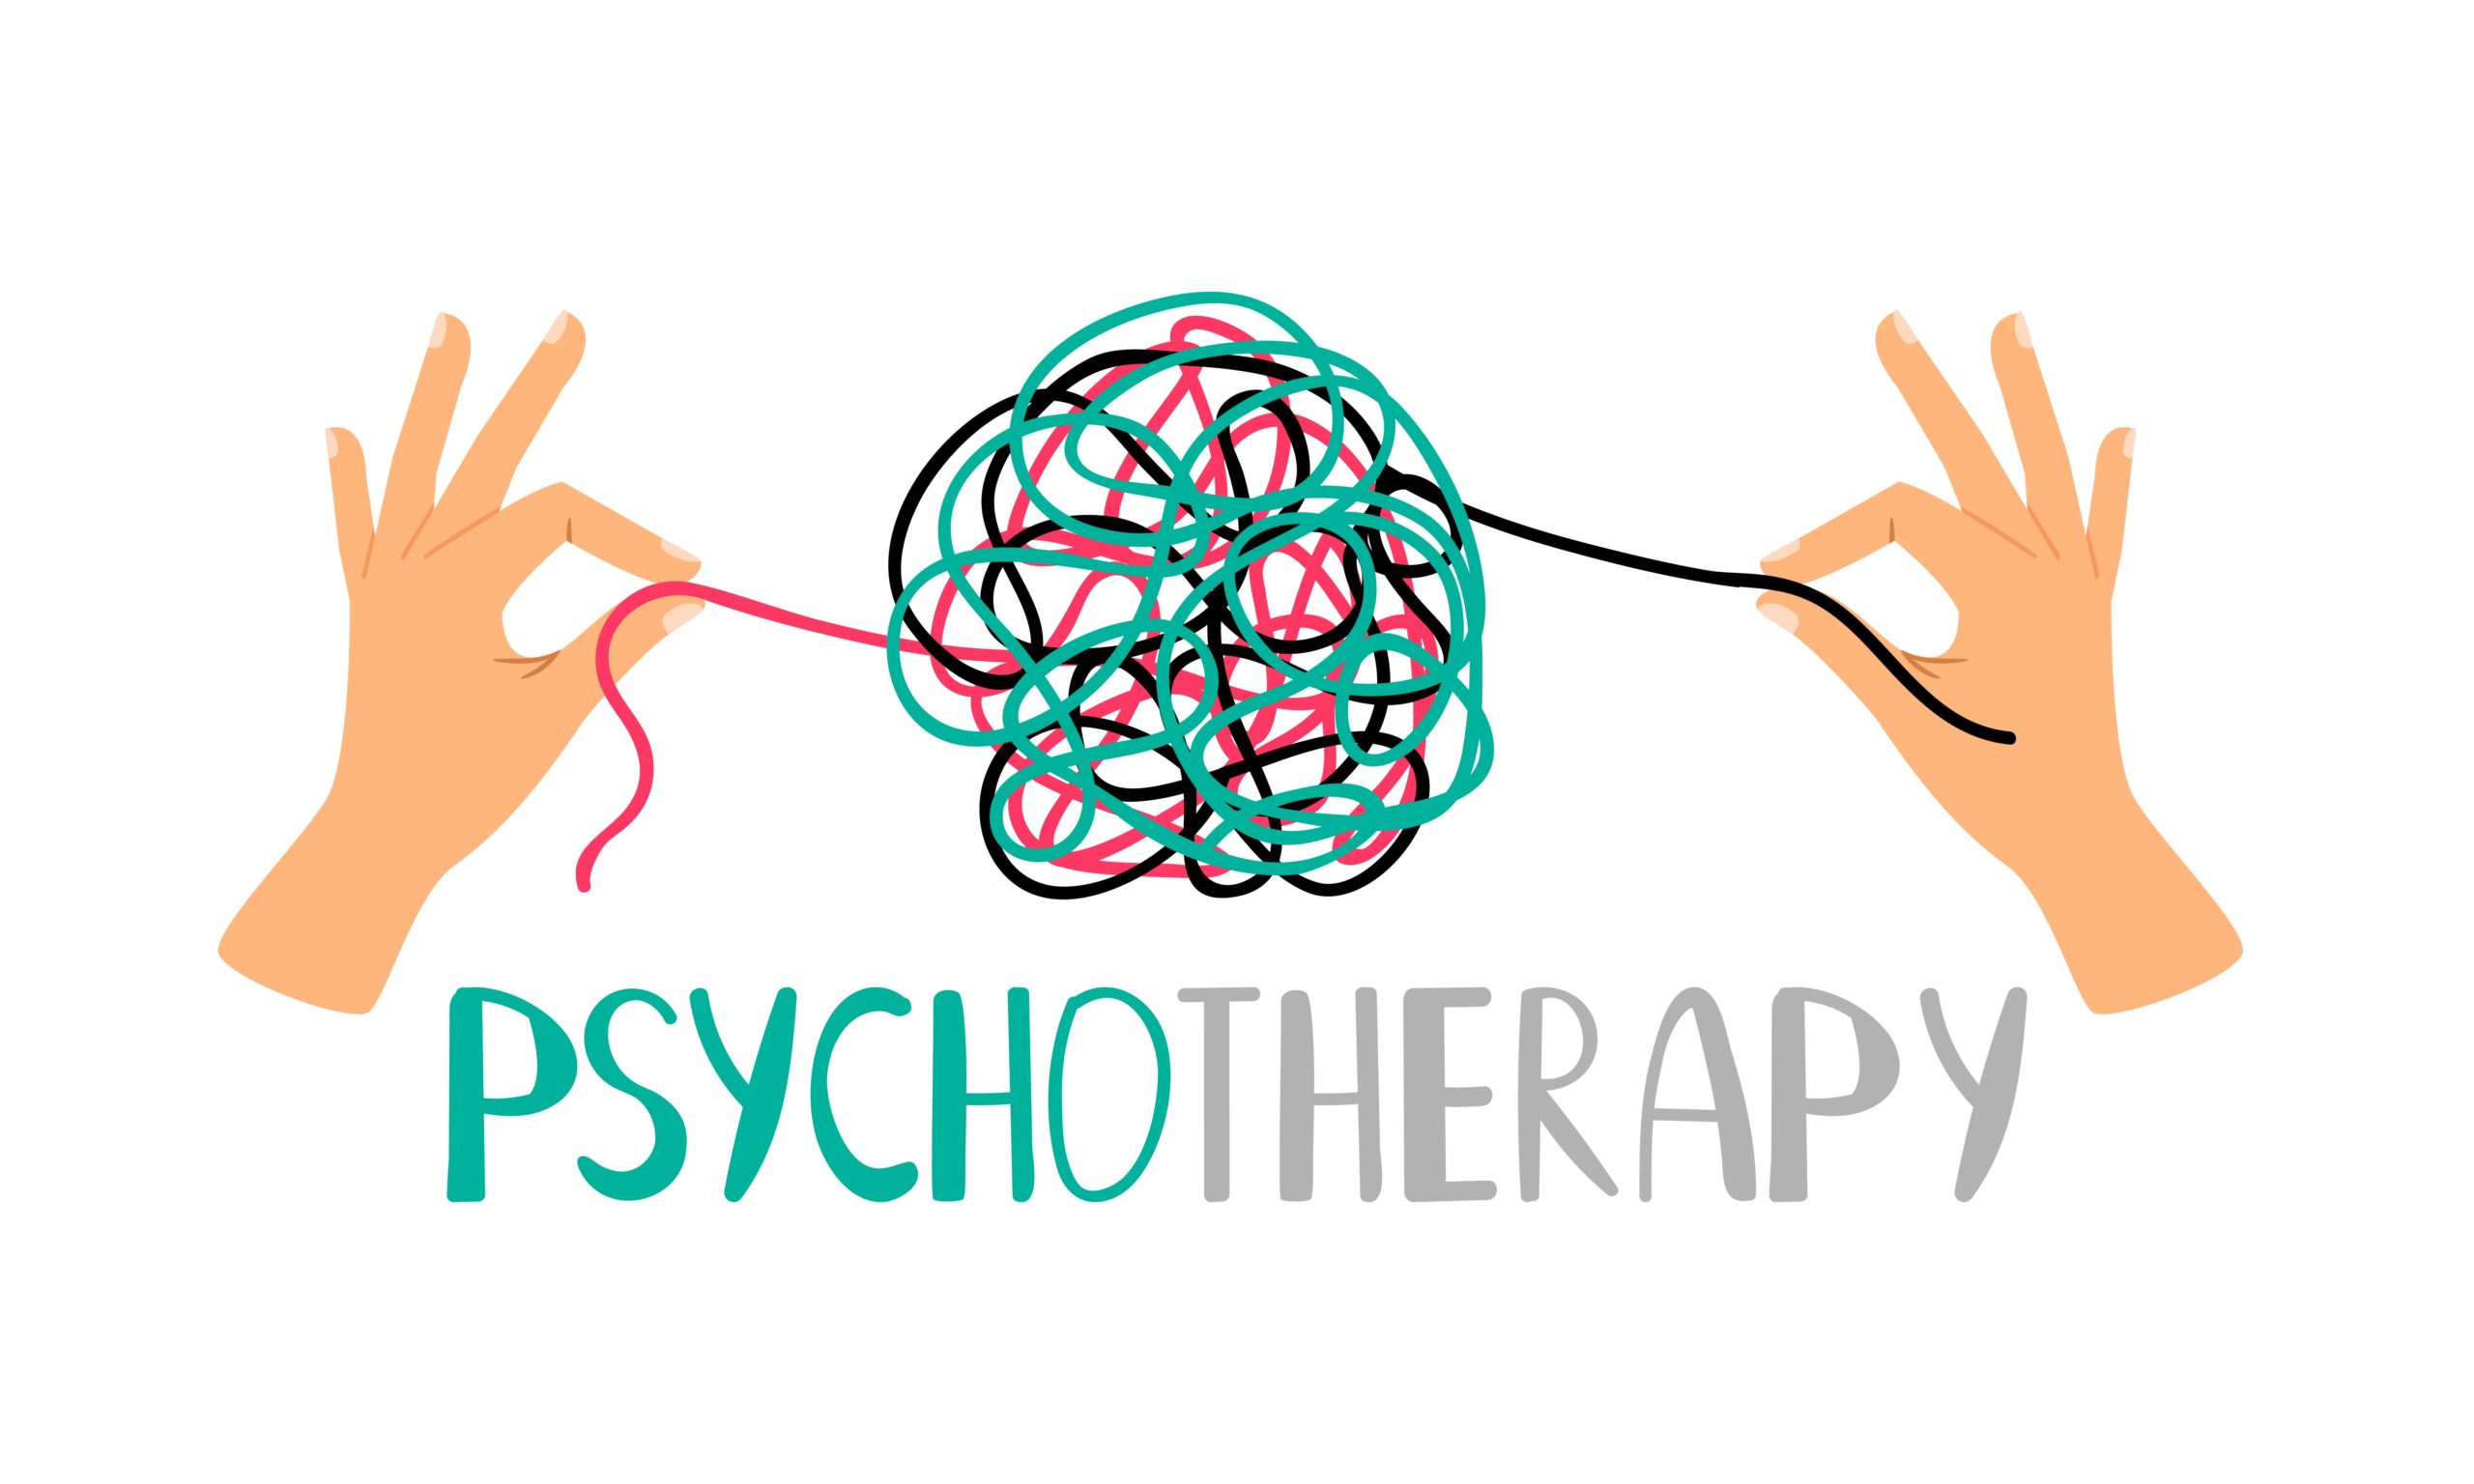 psychotherapy concept illustration with hands untangling messy snarl knot, vector illustration